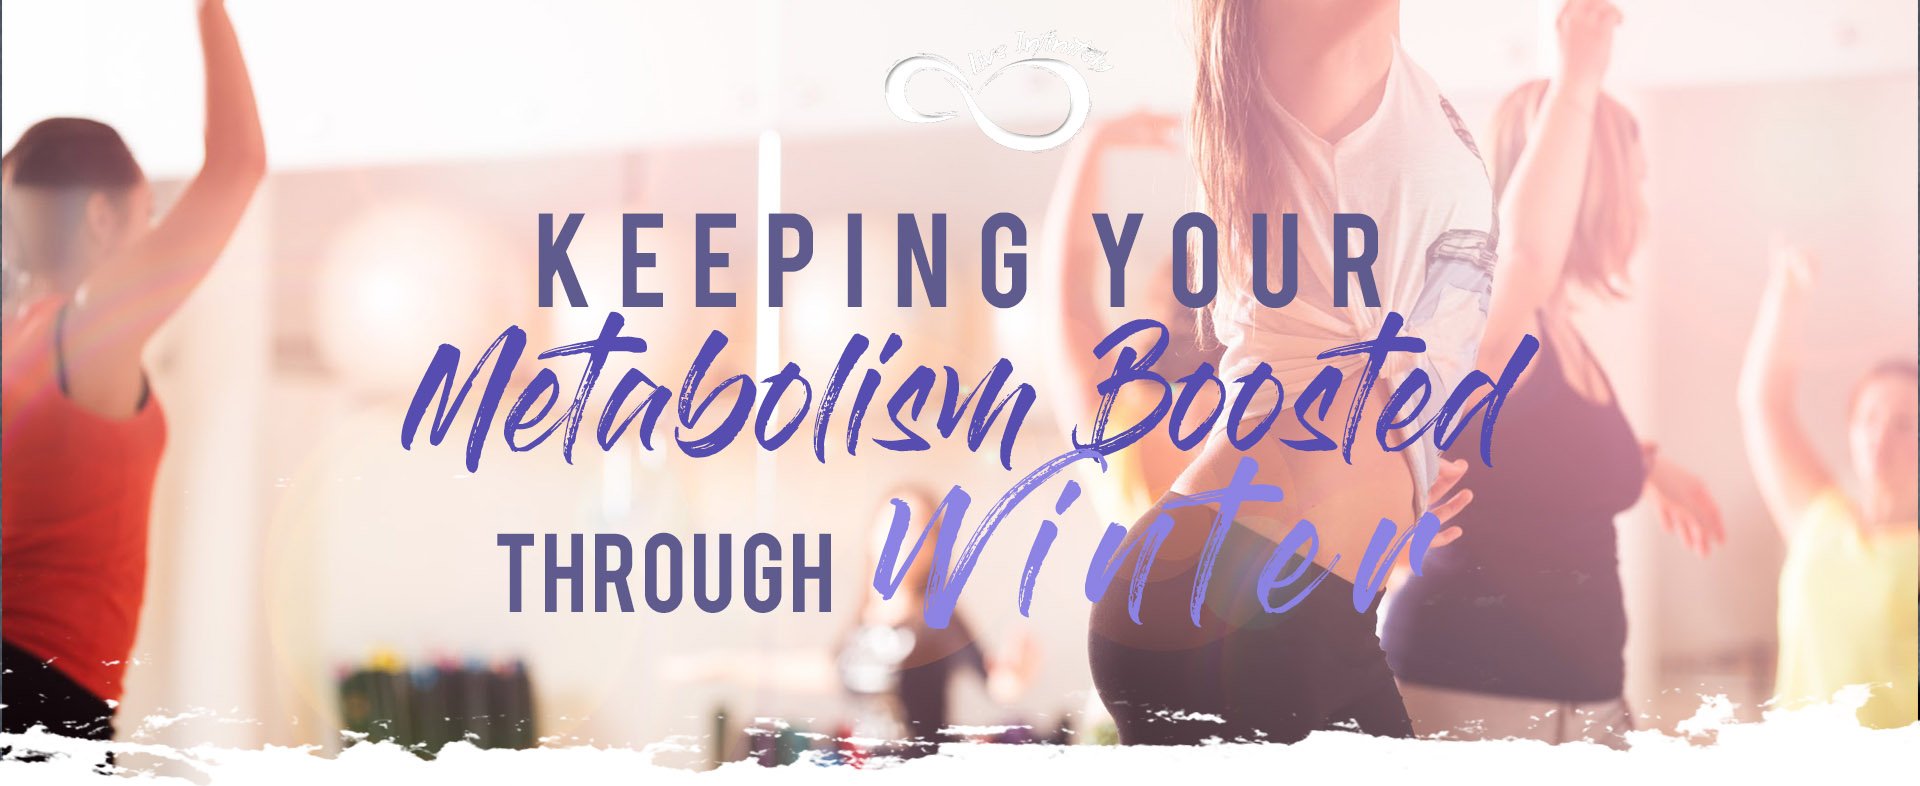 Keeping Your Metabolism Boosted Through Winter